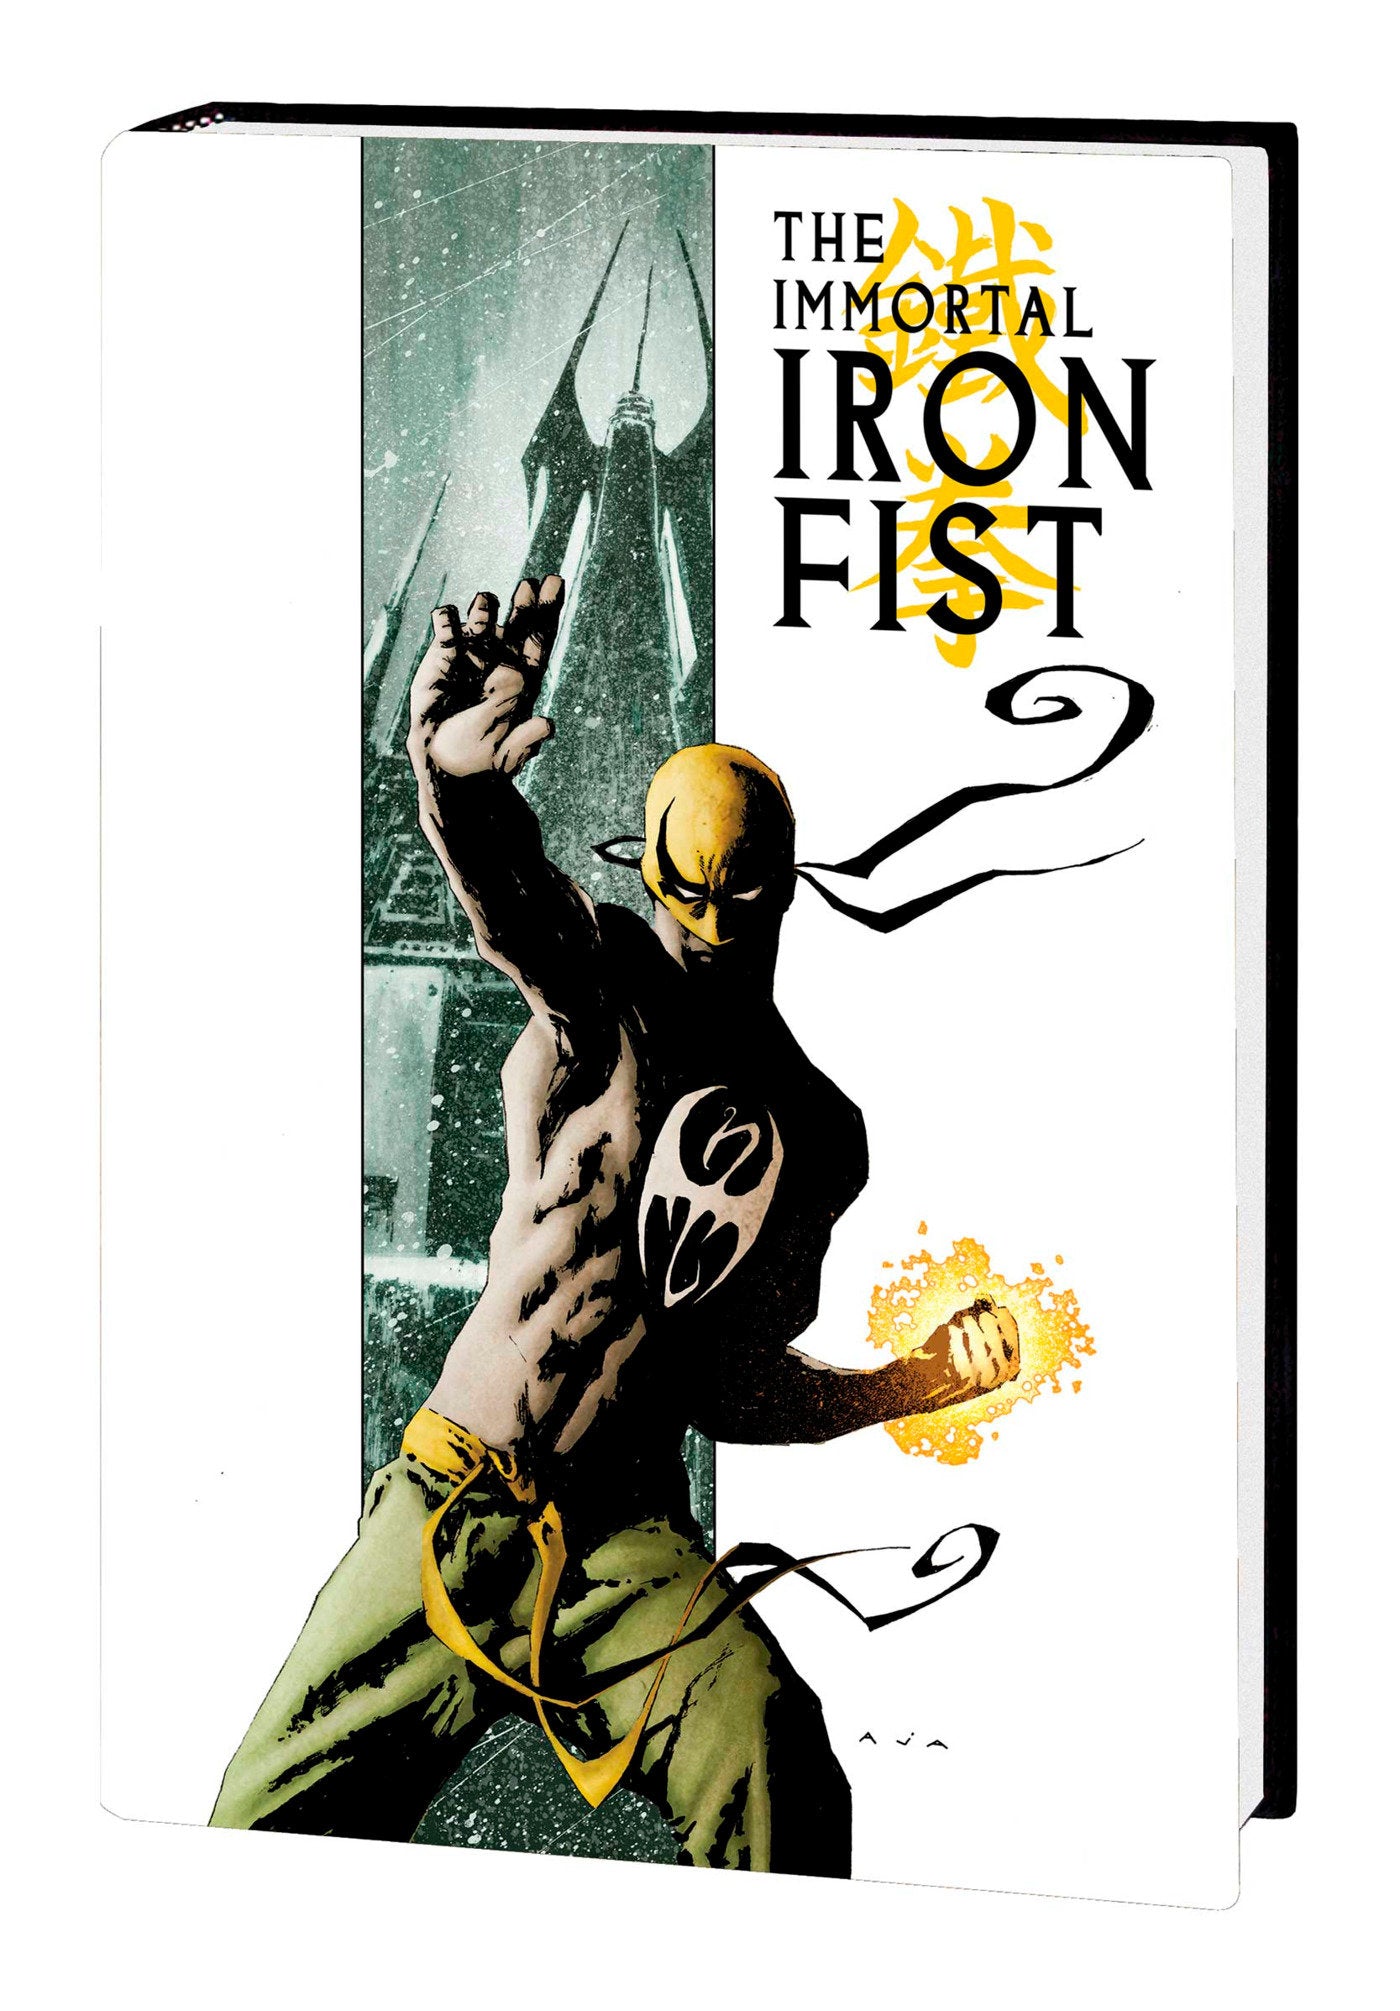 IMMORTAL IRON FIST & THE IMMORTAL WEAPONS OMNIBUS HARDCOVER